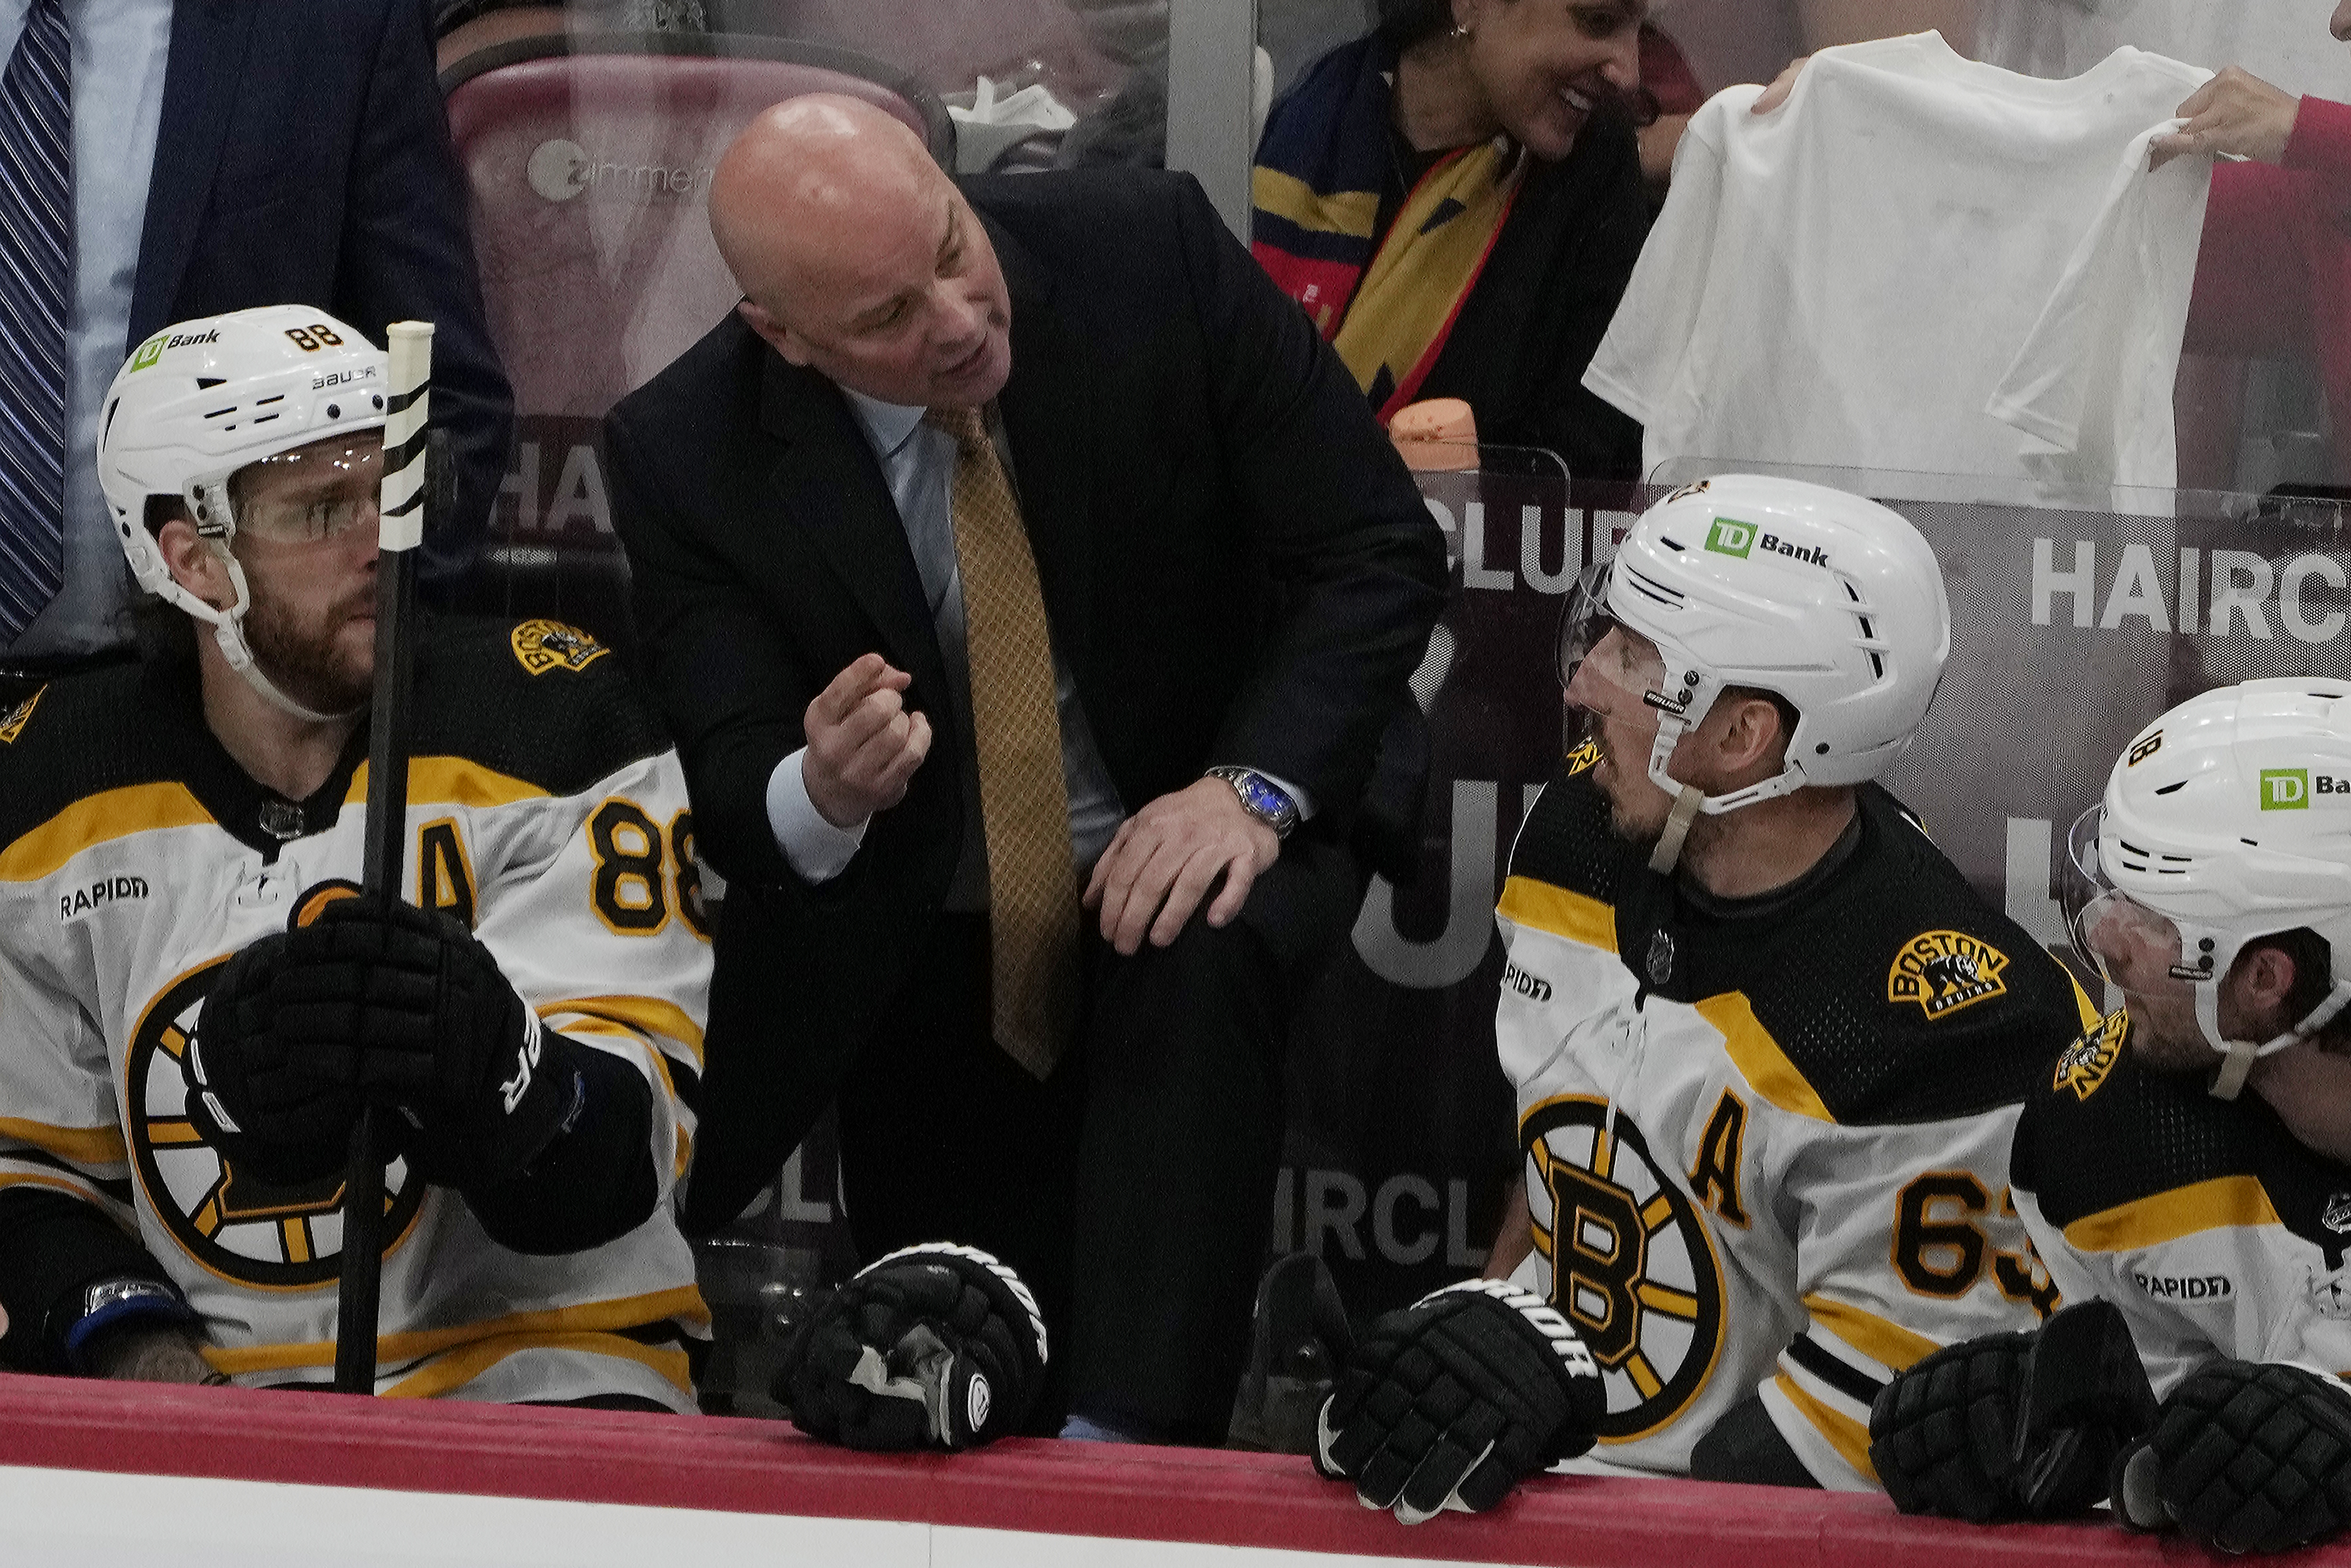 Marchand named Bruins captain, replaces Bergeron